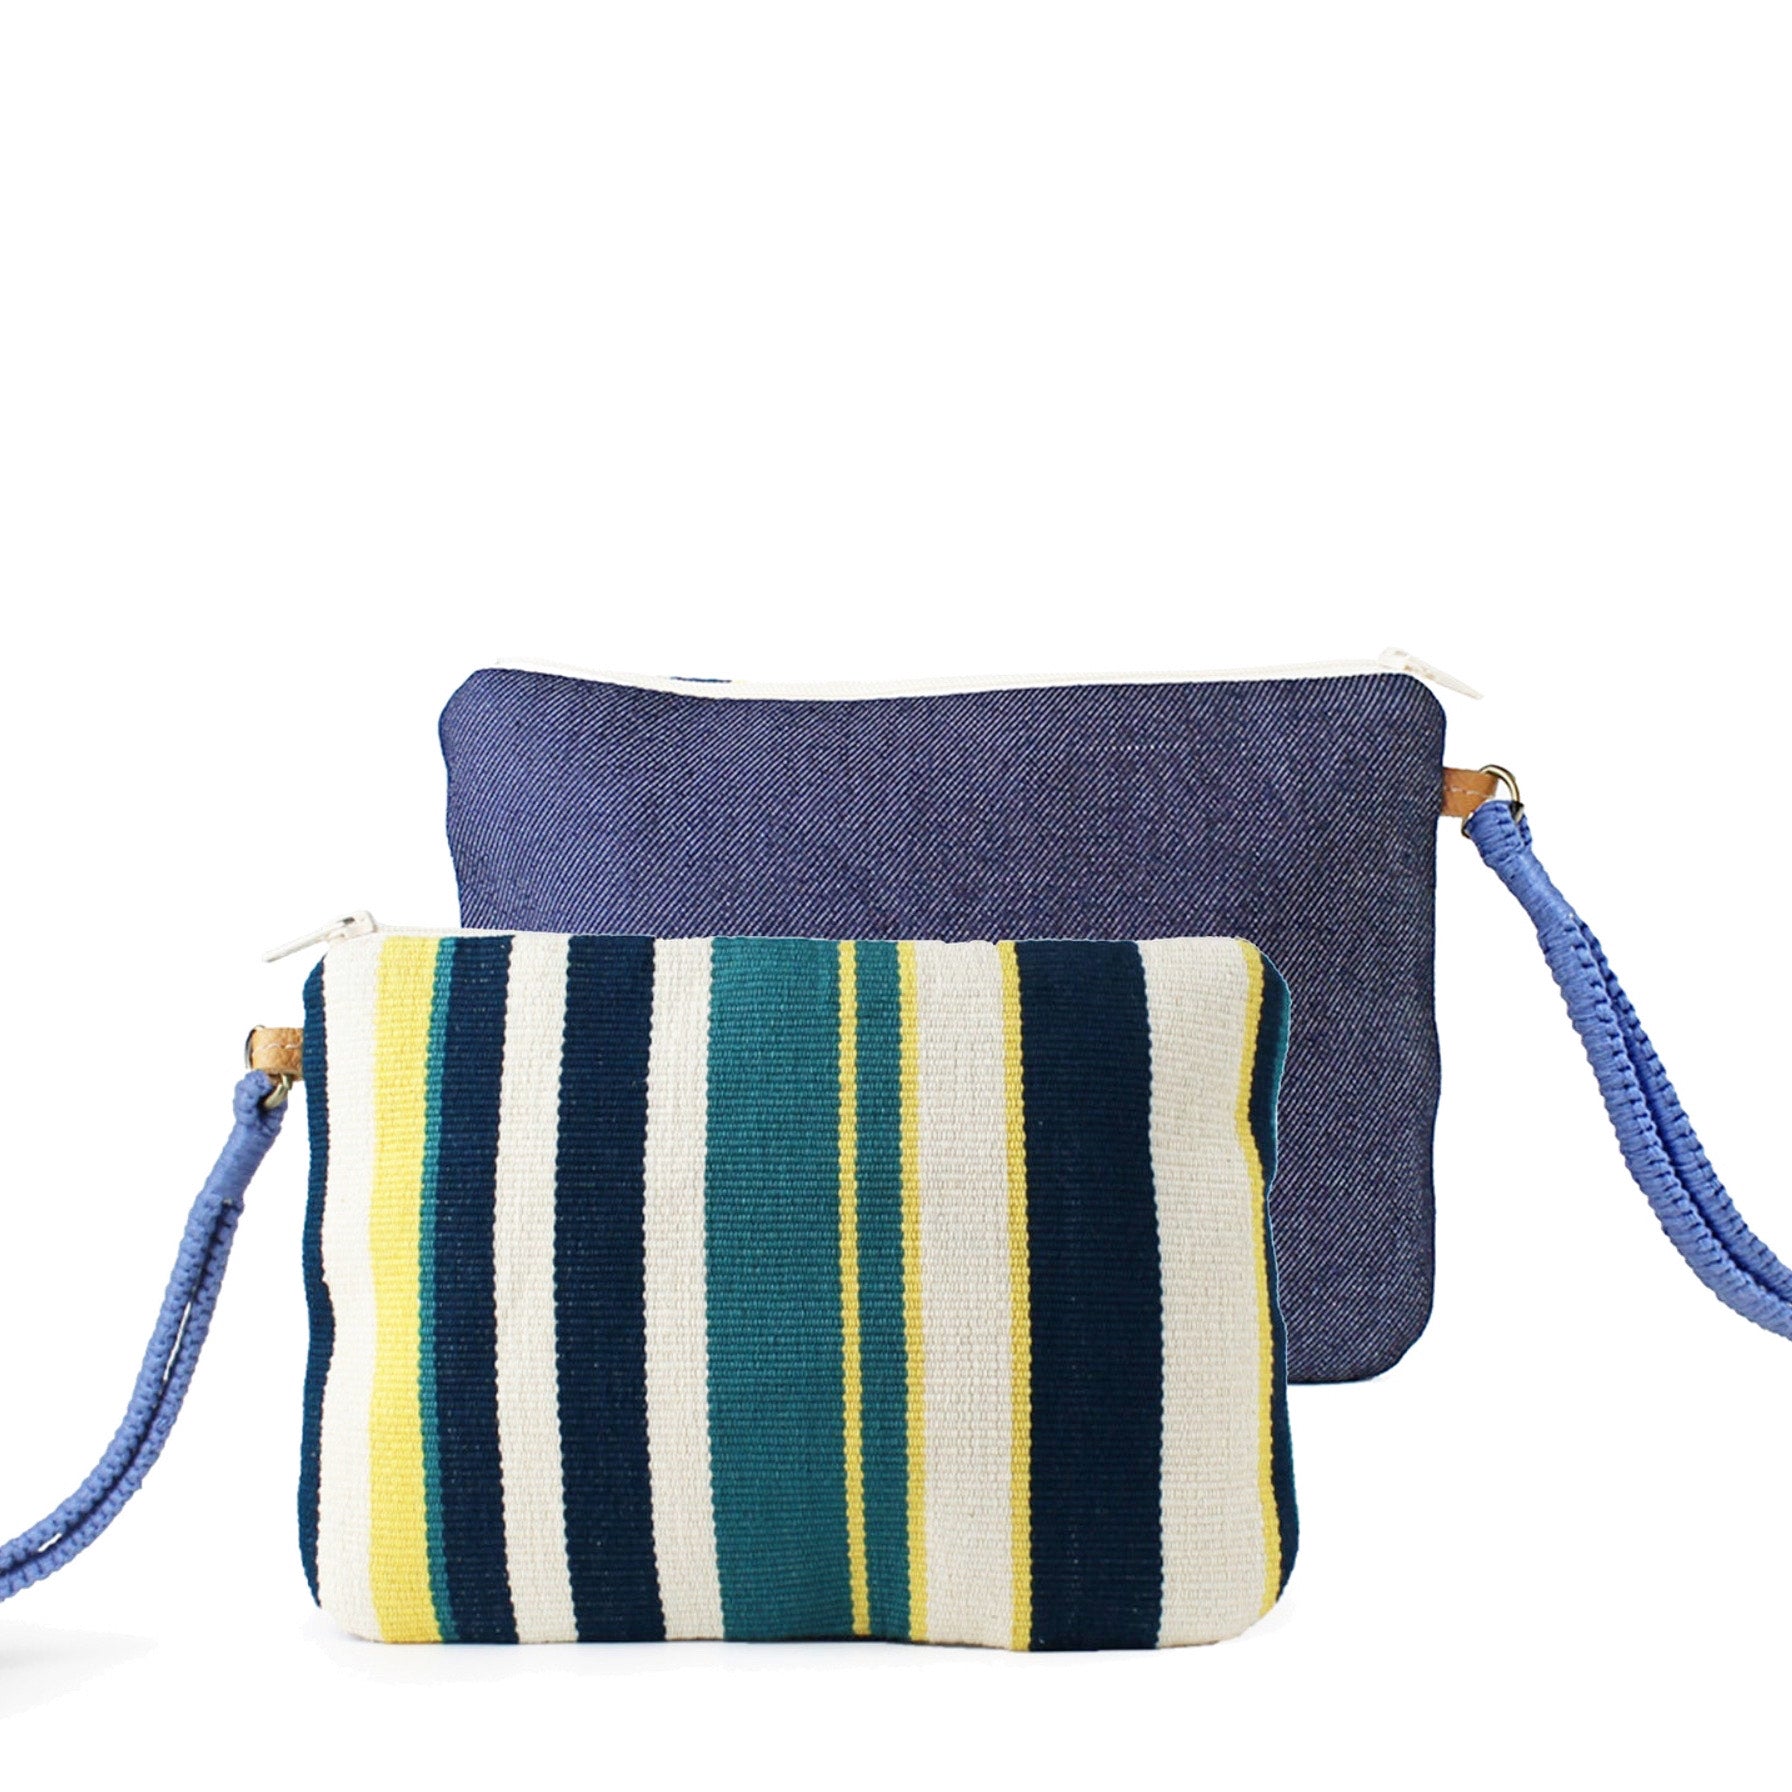 Mini Lily Handwoven Wristlet Clutch Denim Pacific. Two wristlets are in the photo, one showing the front and other showing the back pattern. The front pattern has vertical dark blue, turquoise, and lemon yellow stripes. It has a woven blue hand strap.